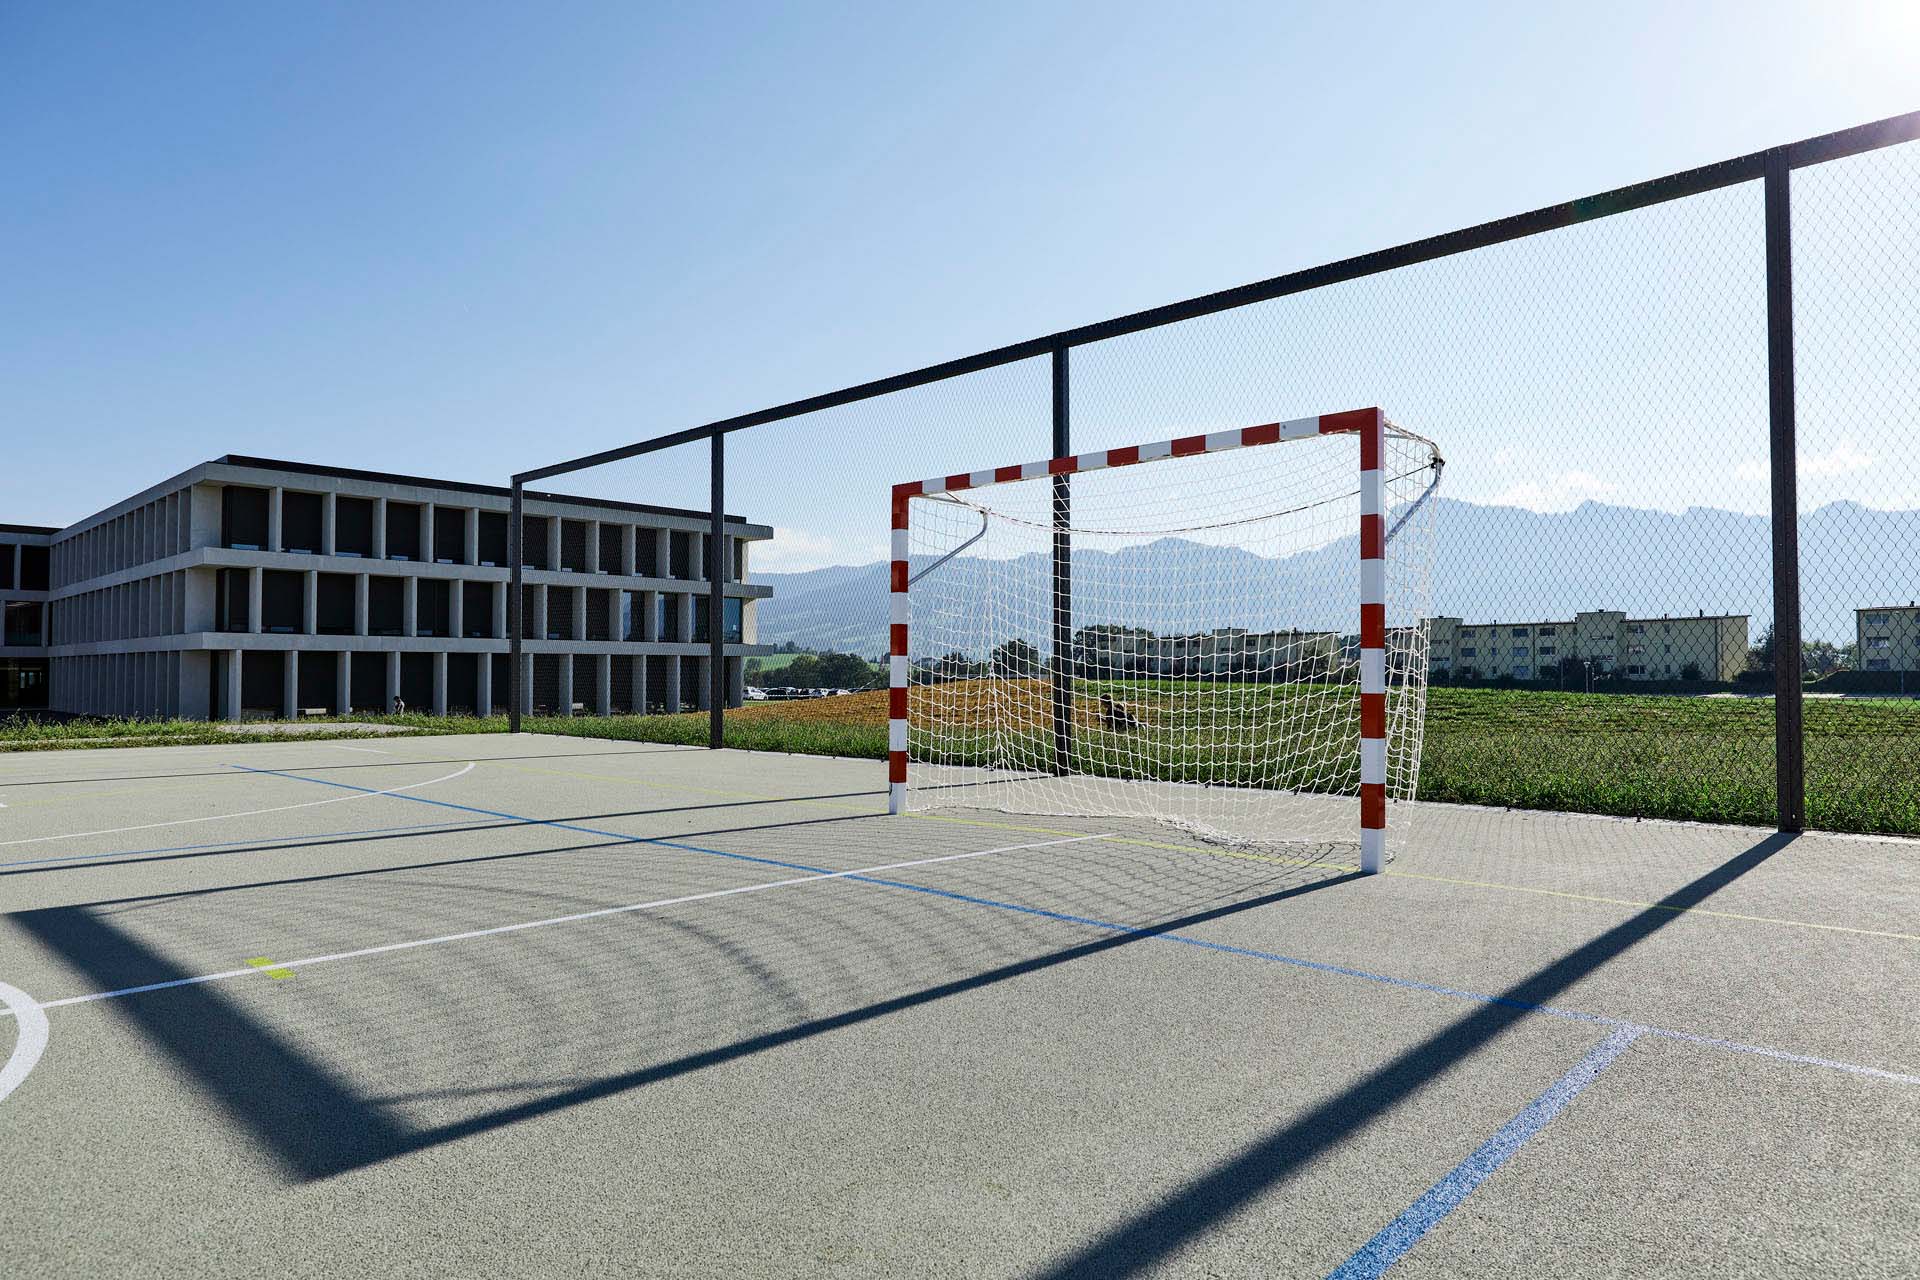 Sports court and goal in front of ball fence